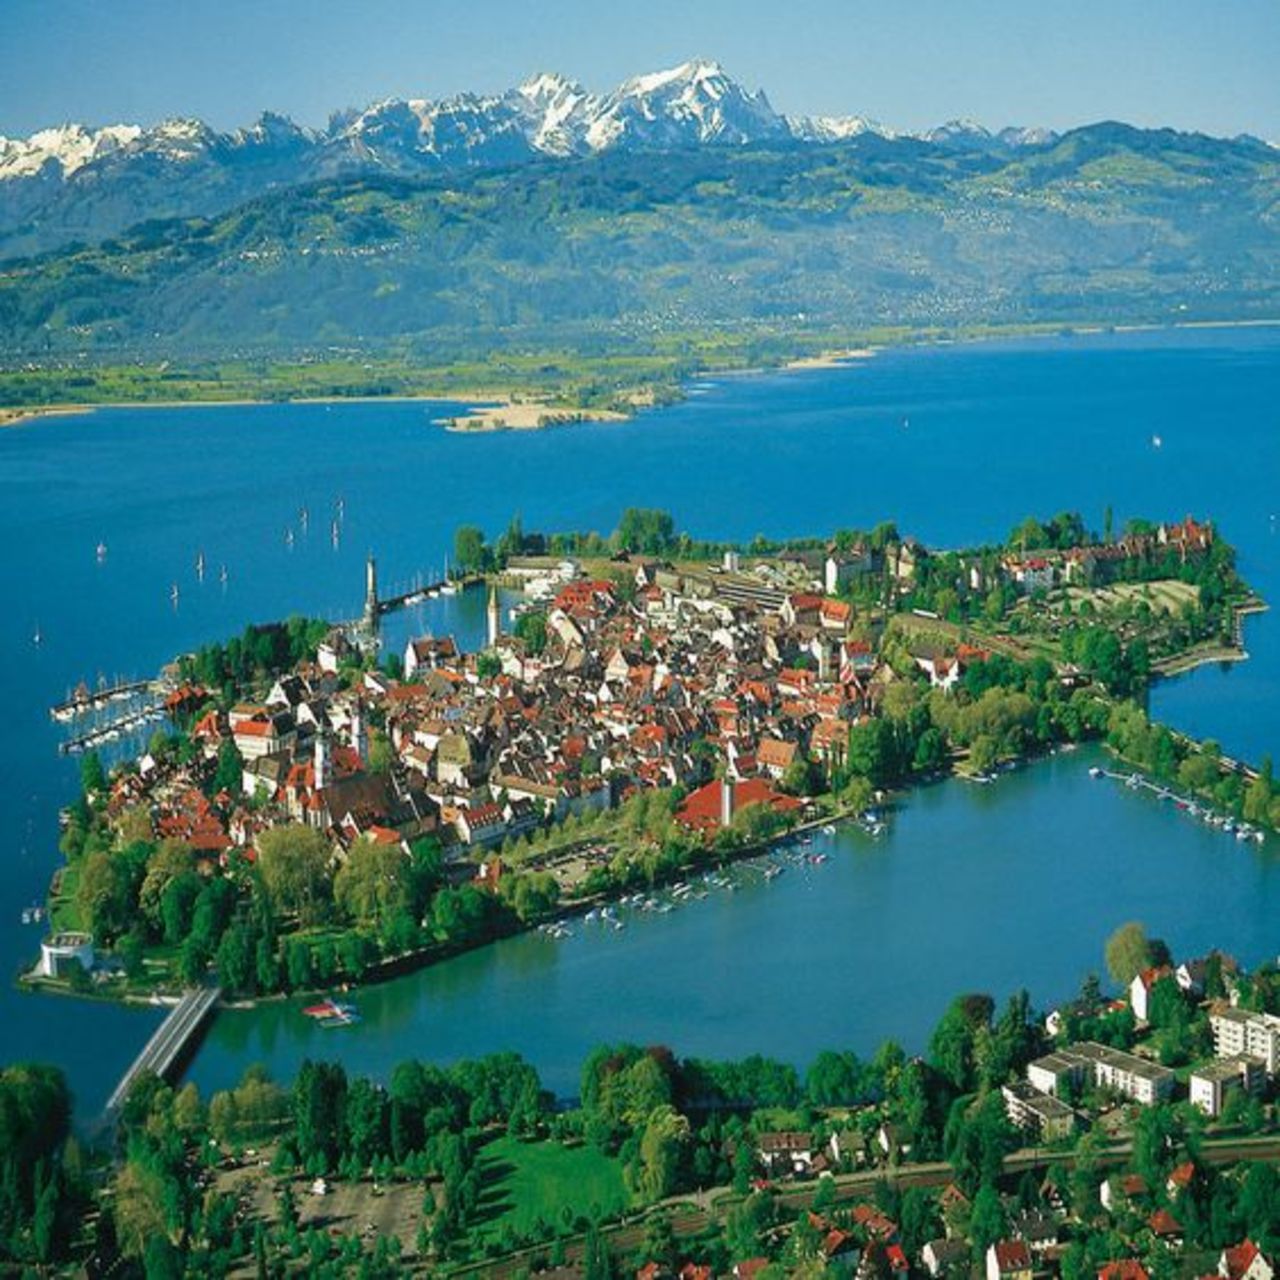 Lindau ~ Bavaria ~ Germany ~ It is a town and island on the eastern side of Lake Constance, the Bodensee https://t.co/j19HPxTHHs